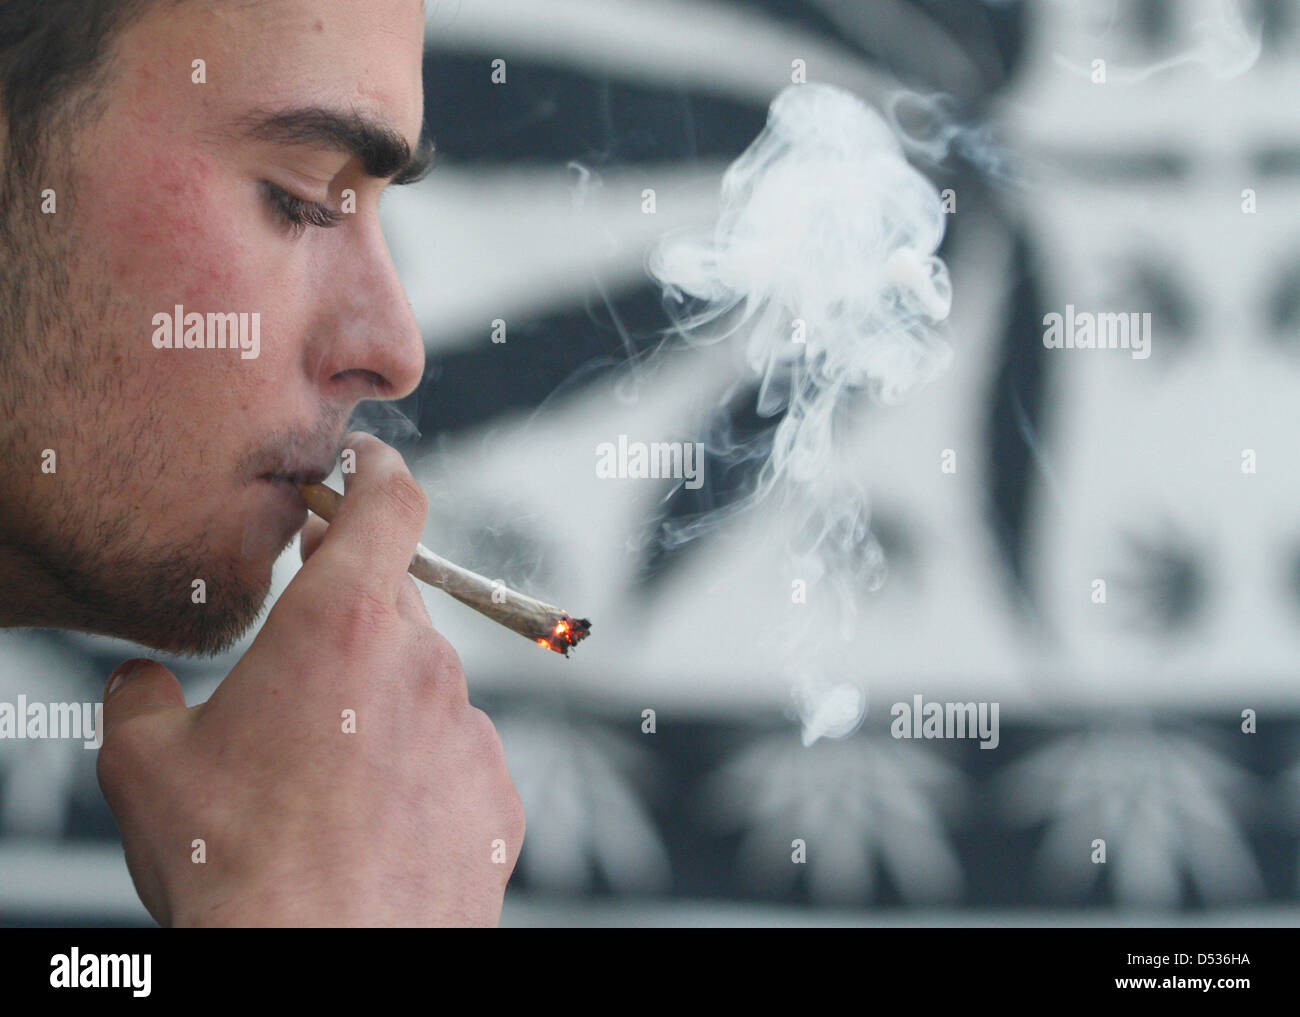 A young man smoking a cannabis joint Stock Photo